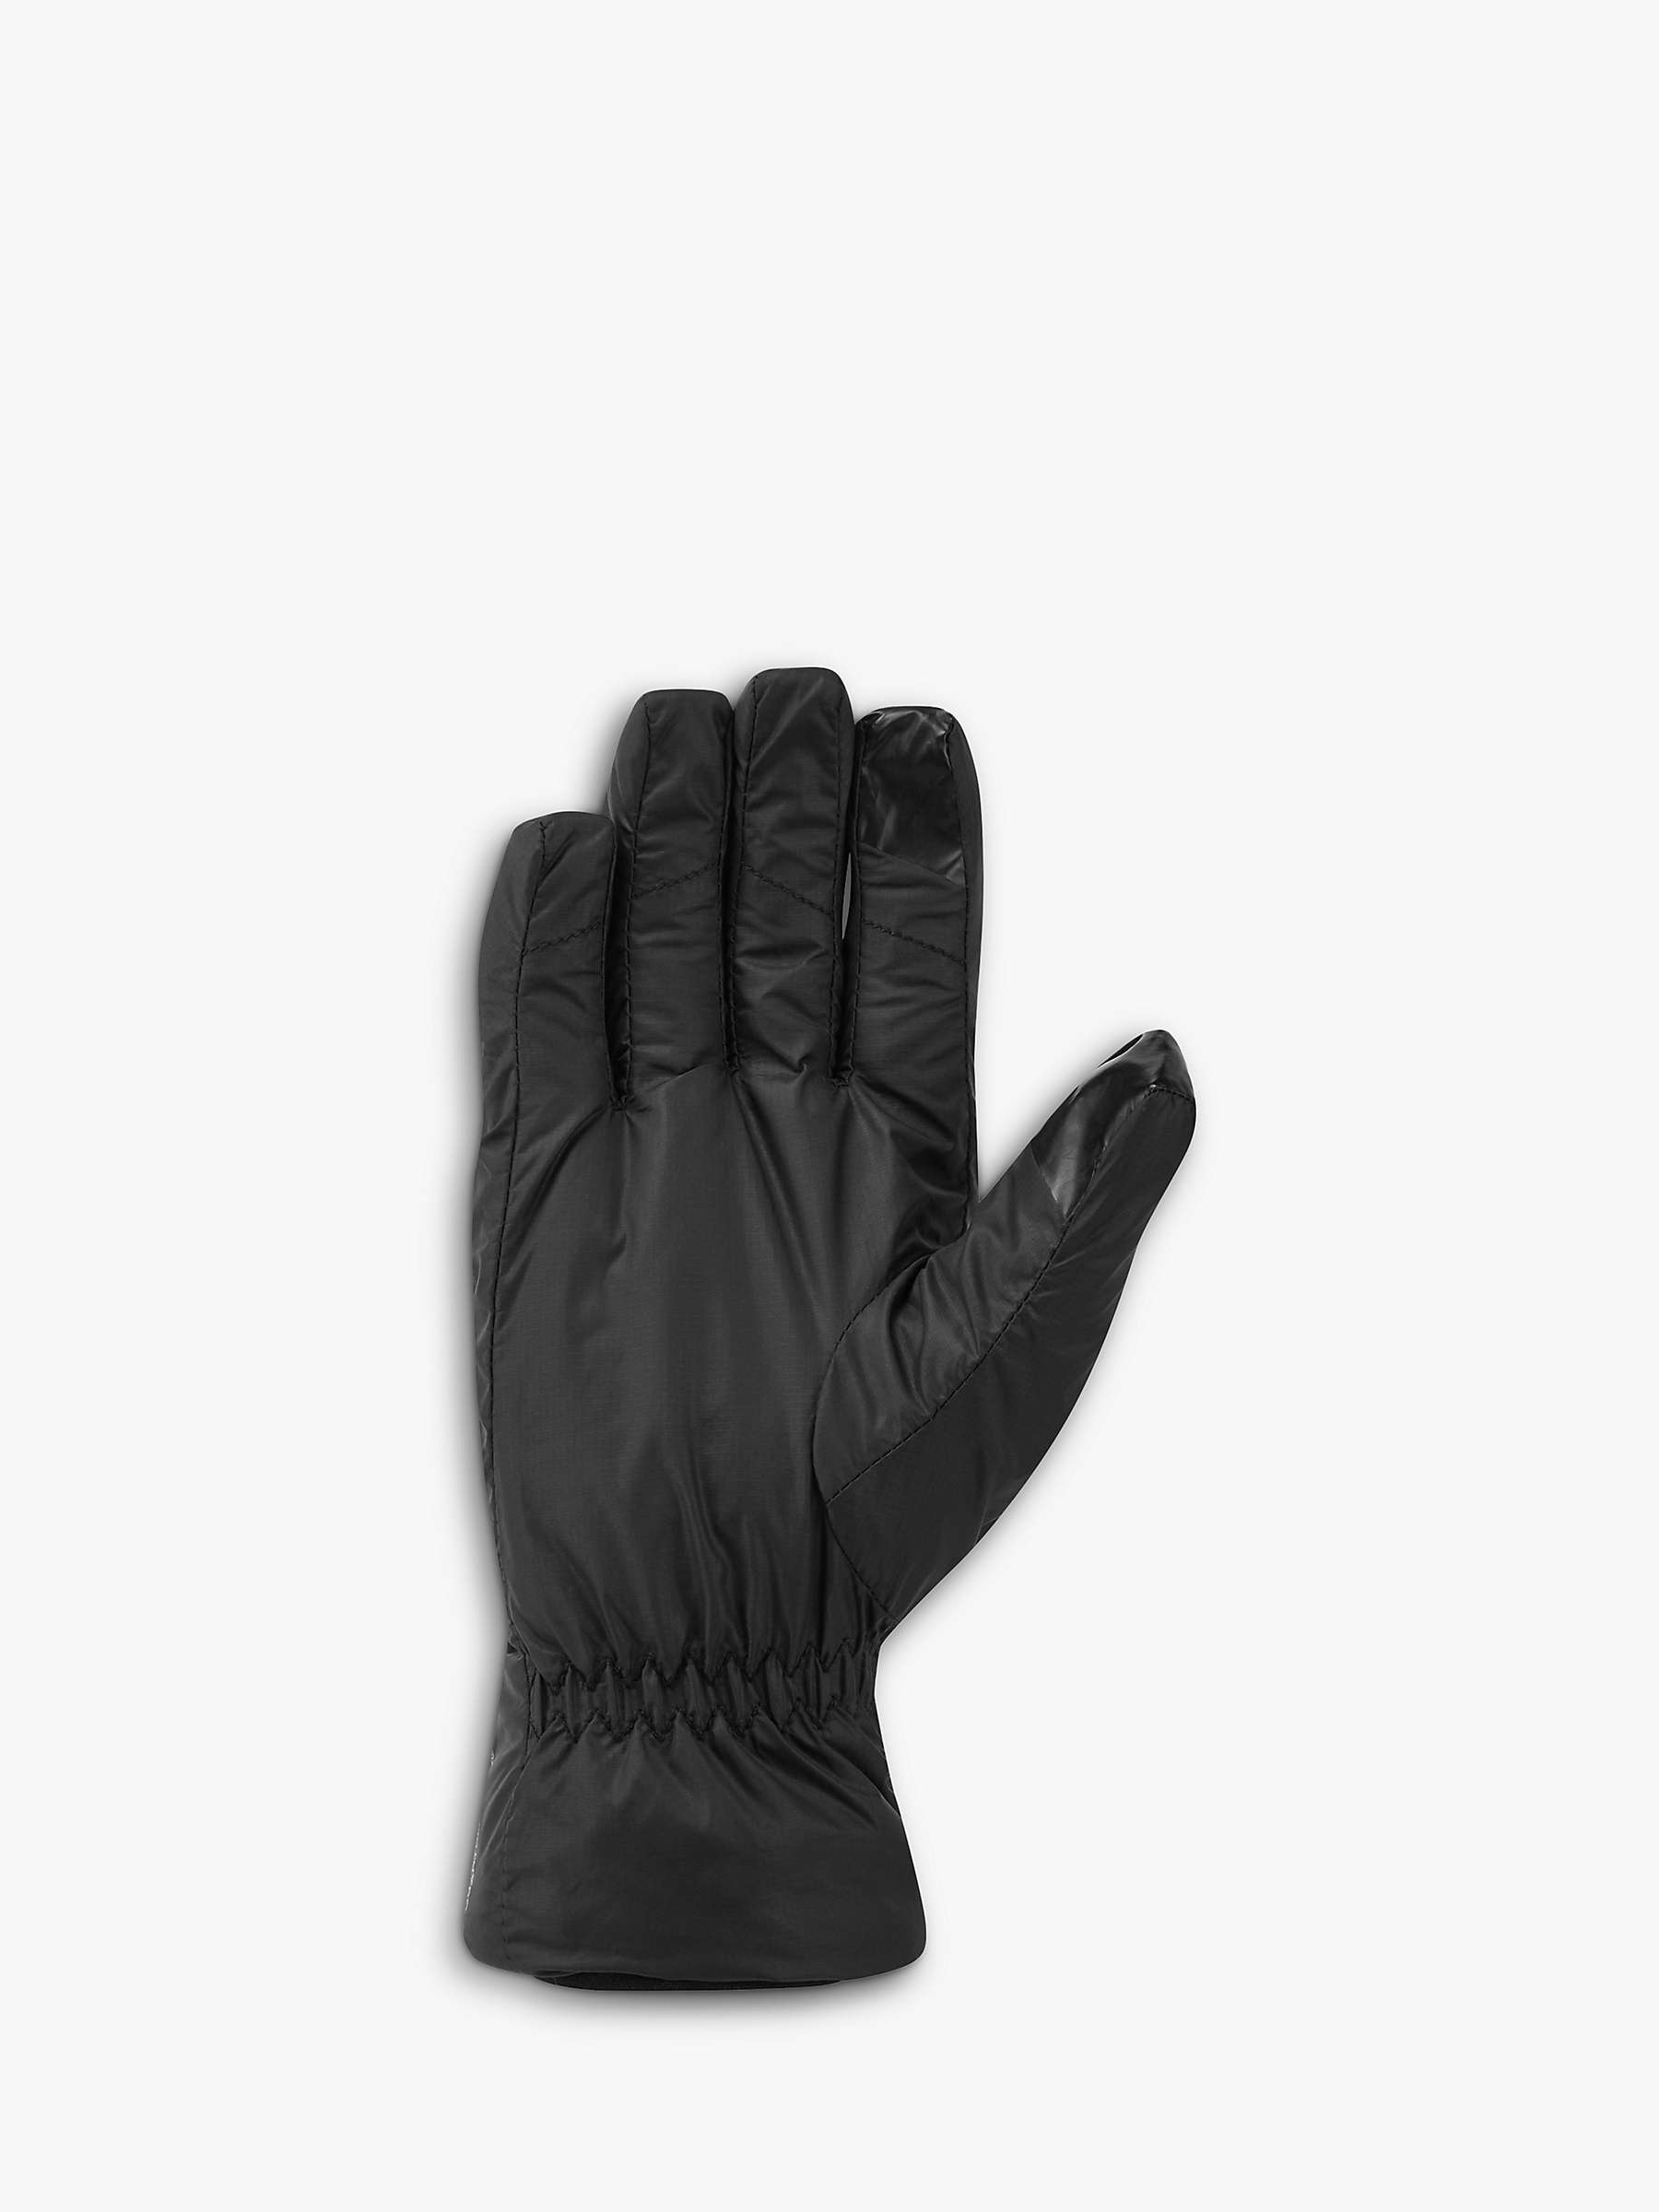 Buy Montane Women's Prism Insulated Gloves, Black Online at johnlewis.com